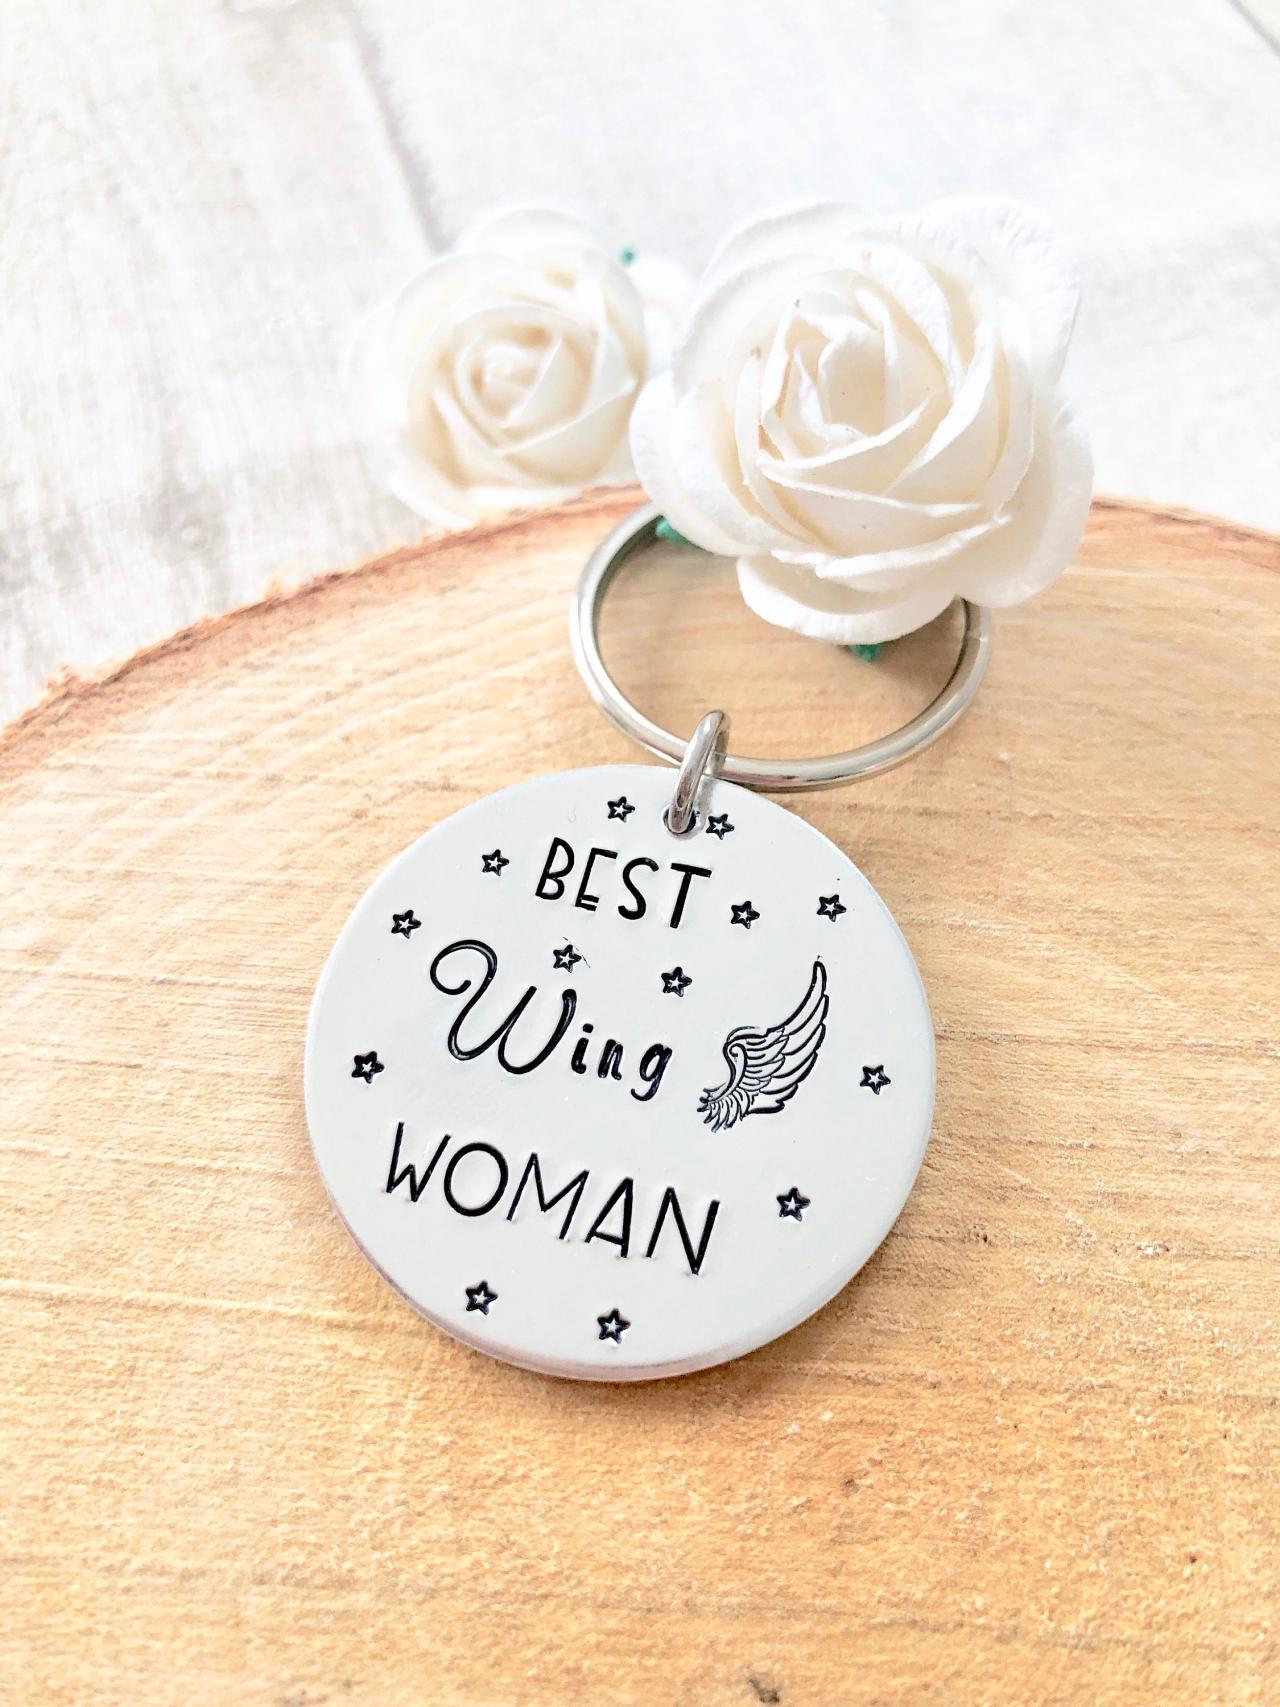 Best Wing Woman, Wingwoman, Bridesmaid Gift, Personalised Gift, Best Friend Gift, Mate Gift, Gift for Her, Best Mate Gift, Handstamped